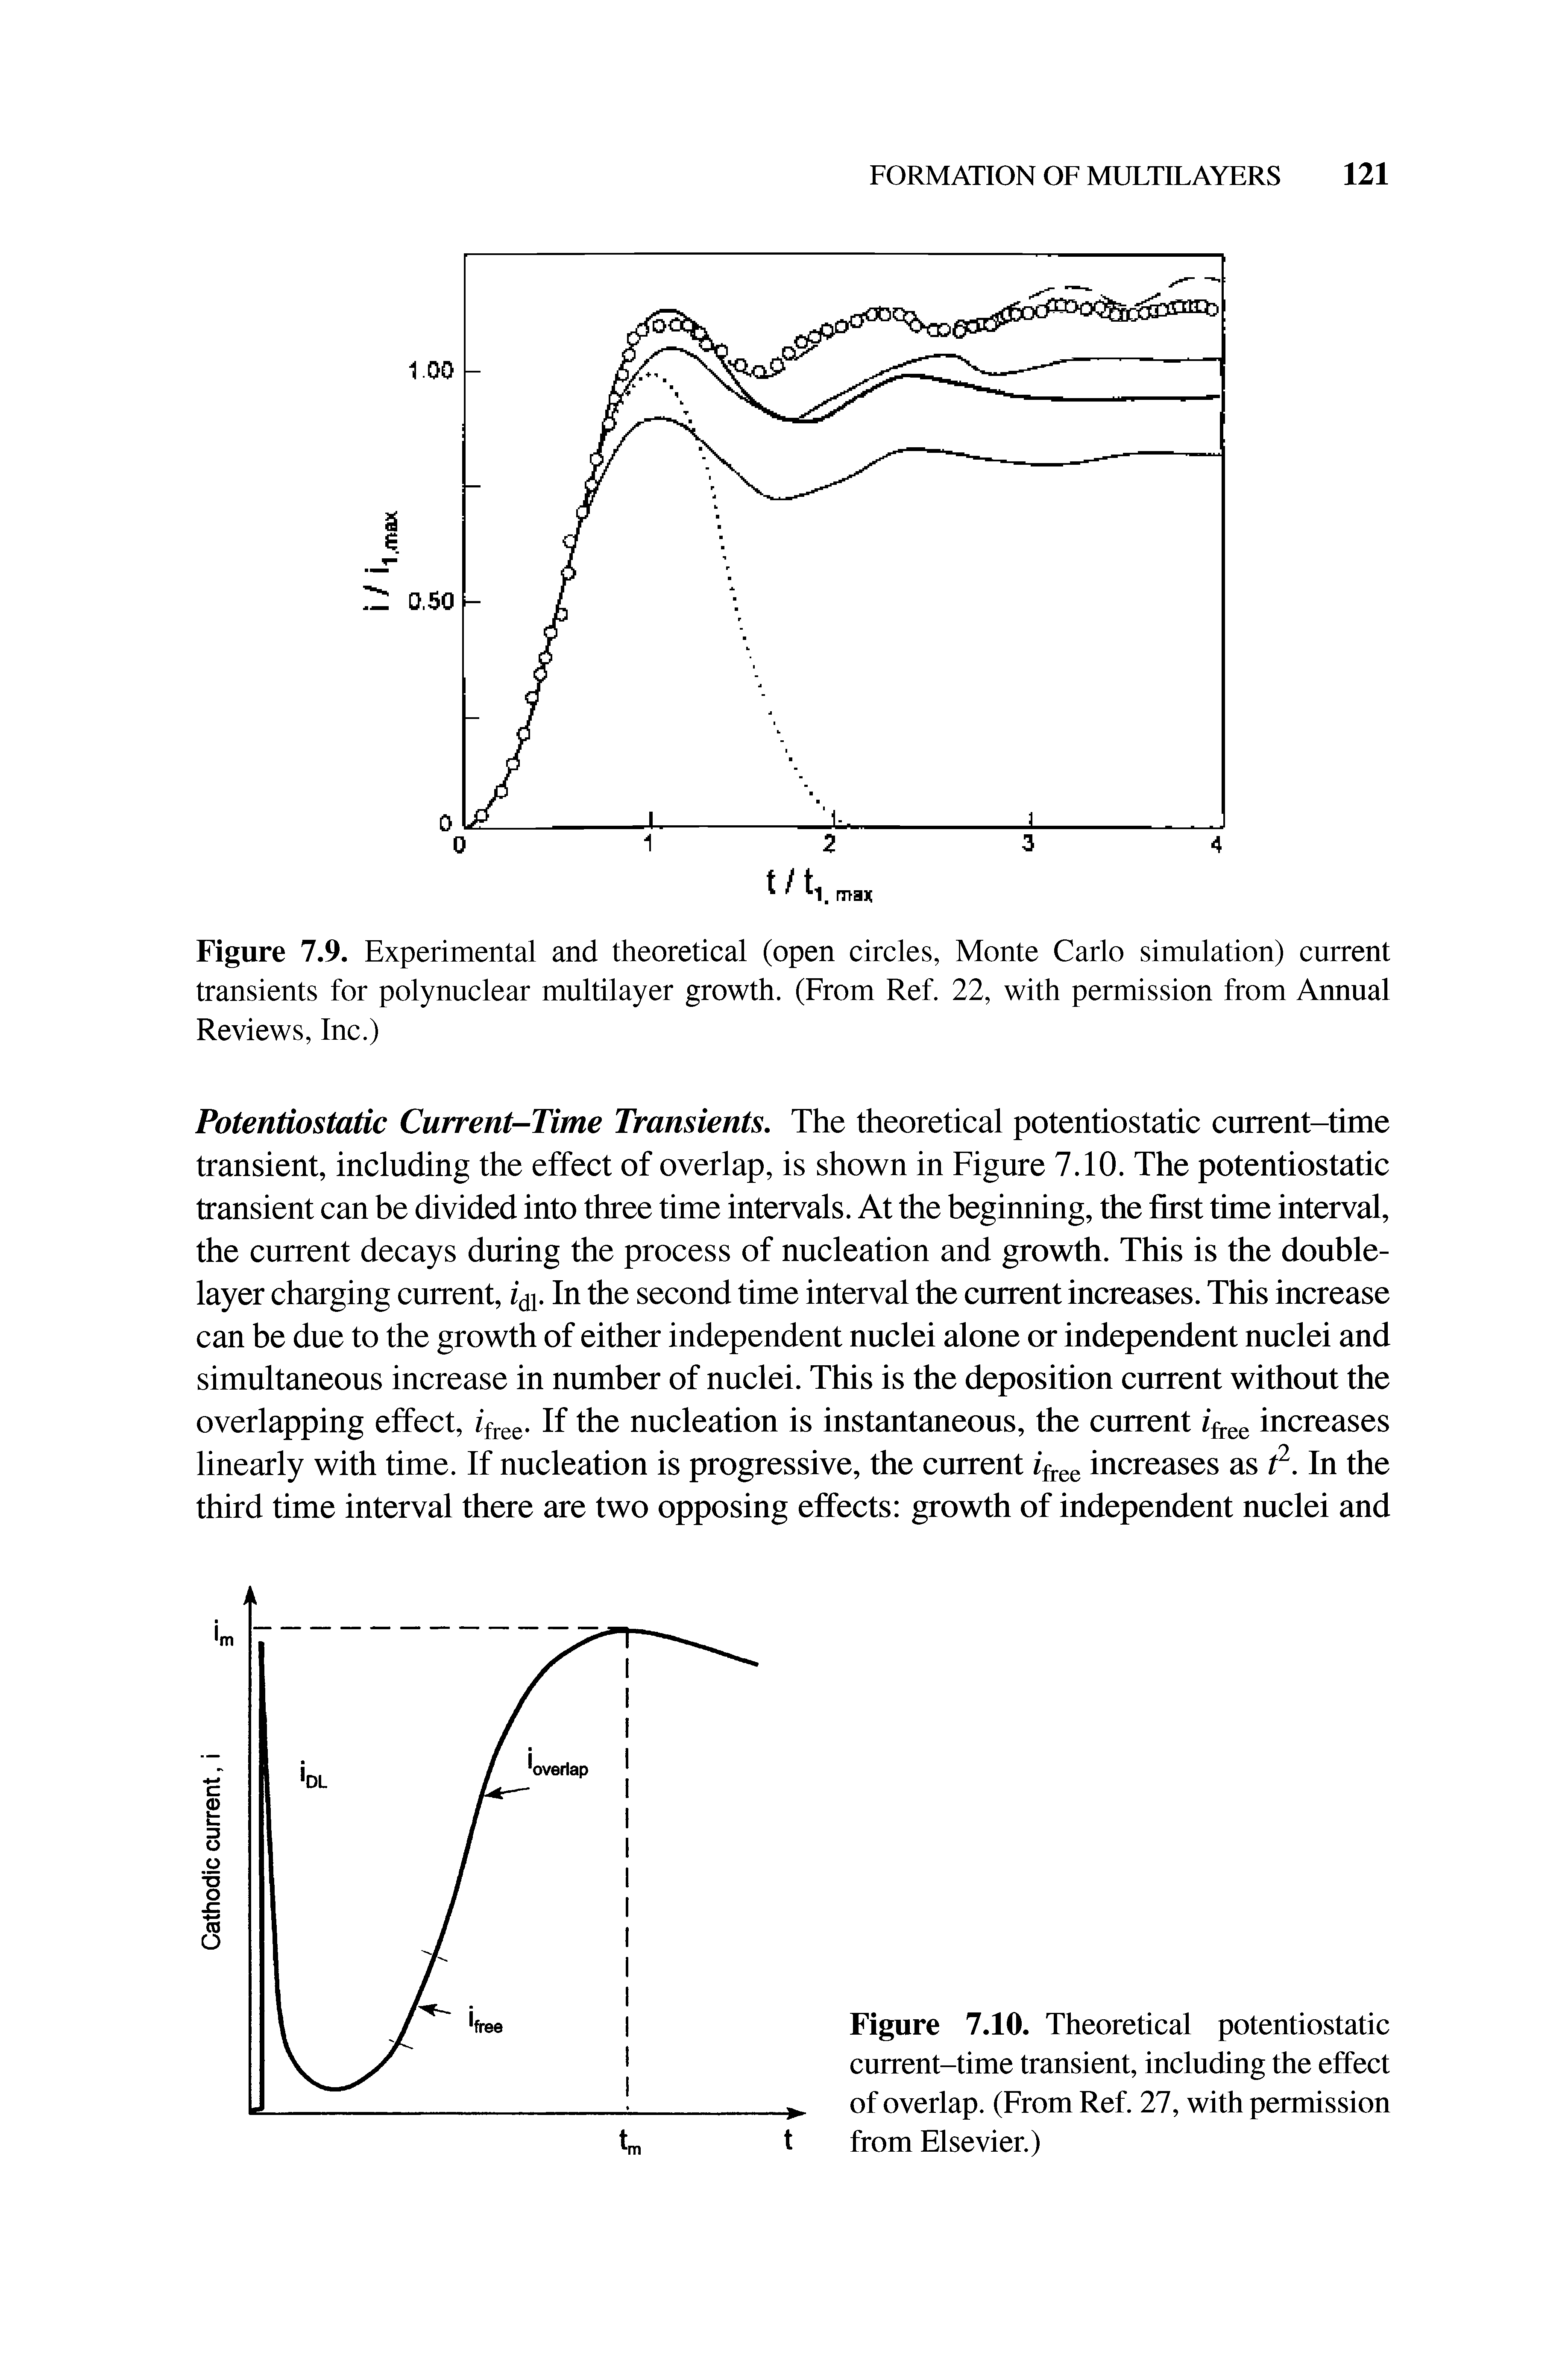 Figure 7.10. Theoretical potentiostatic current-time transient, including the effect of overlap. (From Ref. 27, with permission from Elsevier.)...